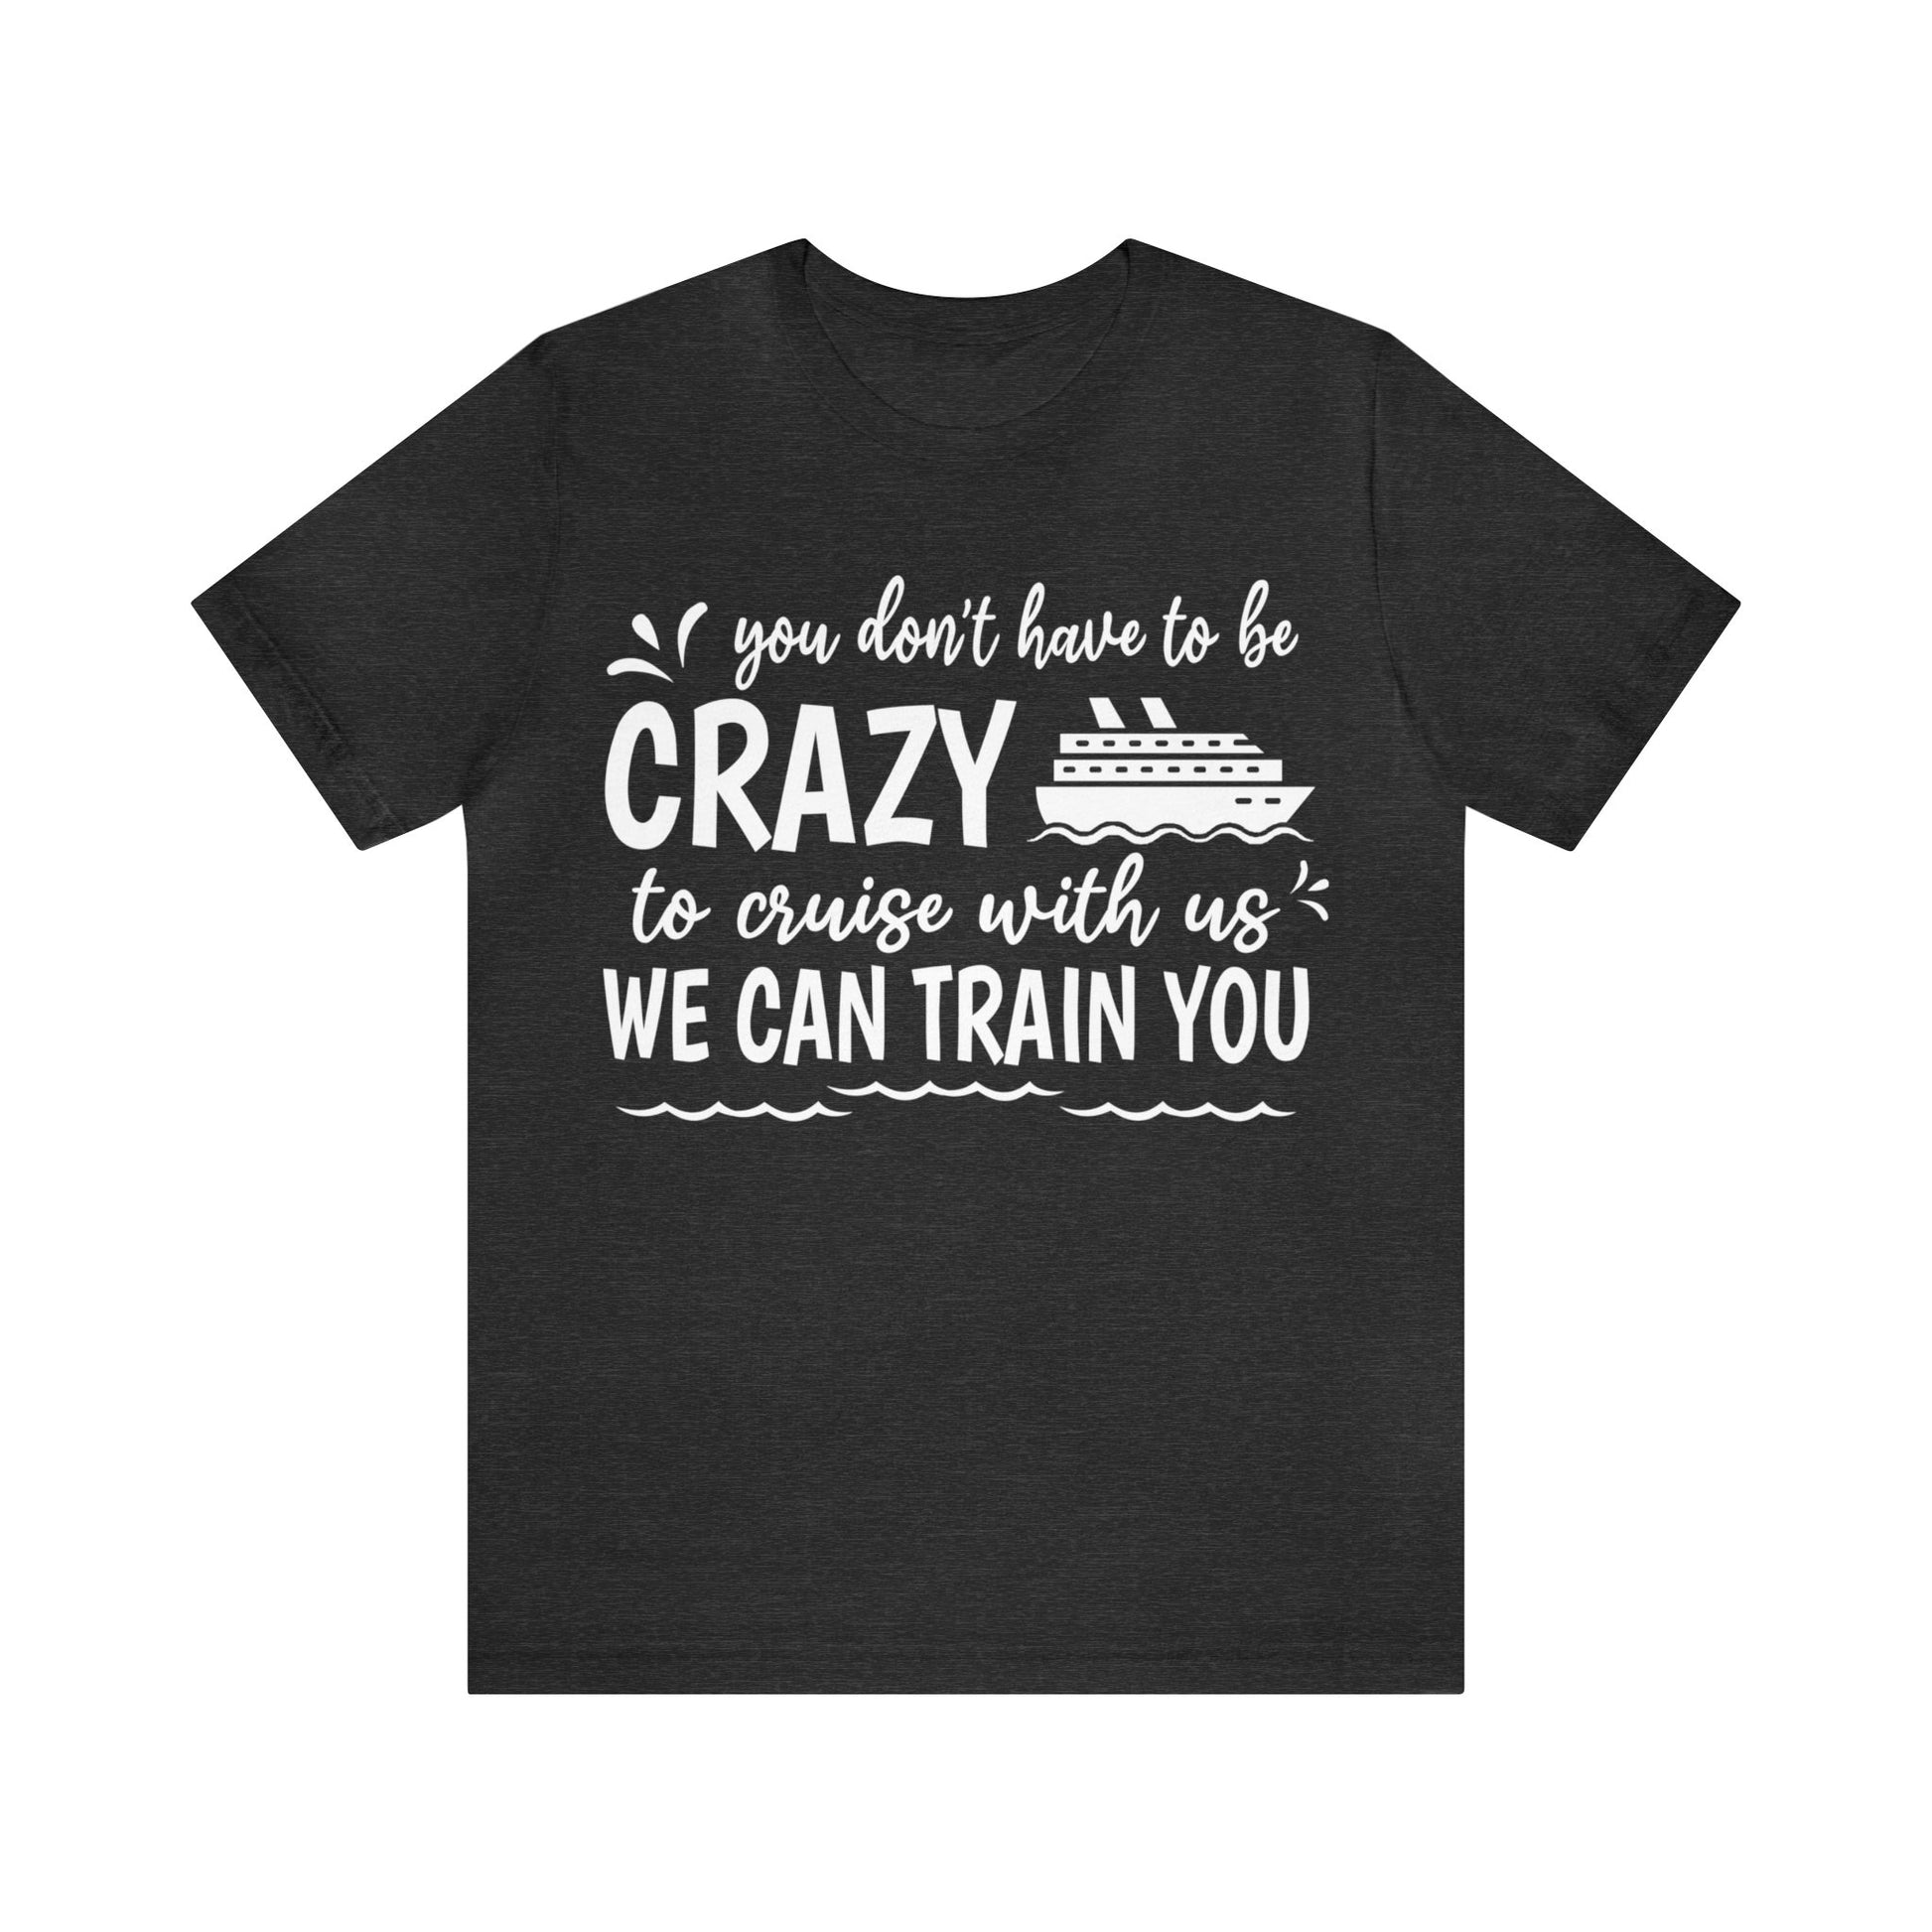 You don't have to be CRAZY to cruise with us We can train you Shirt in Dark Grey Heather